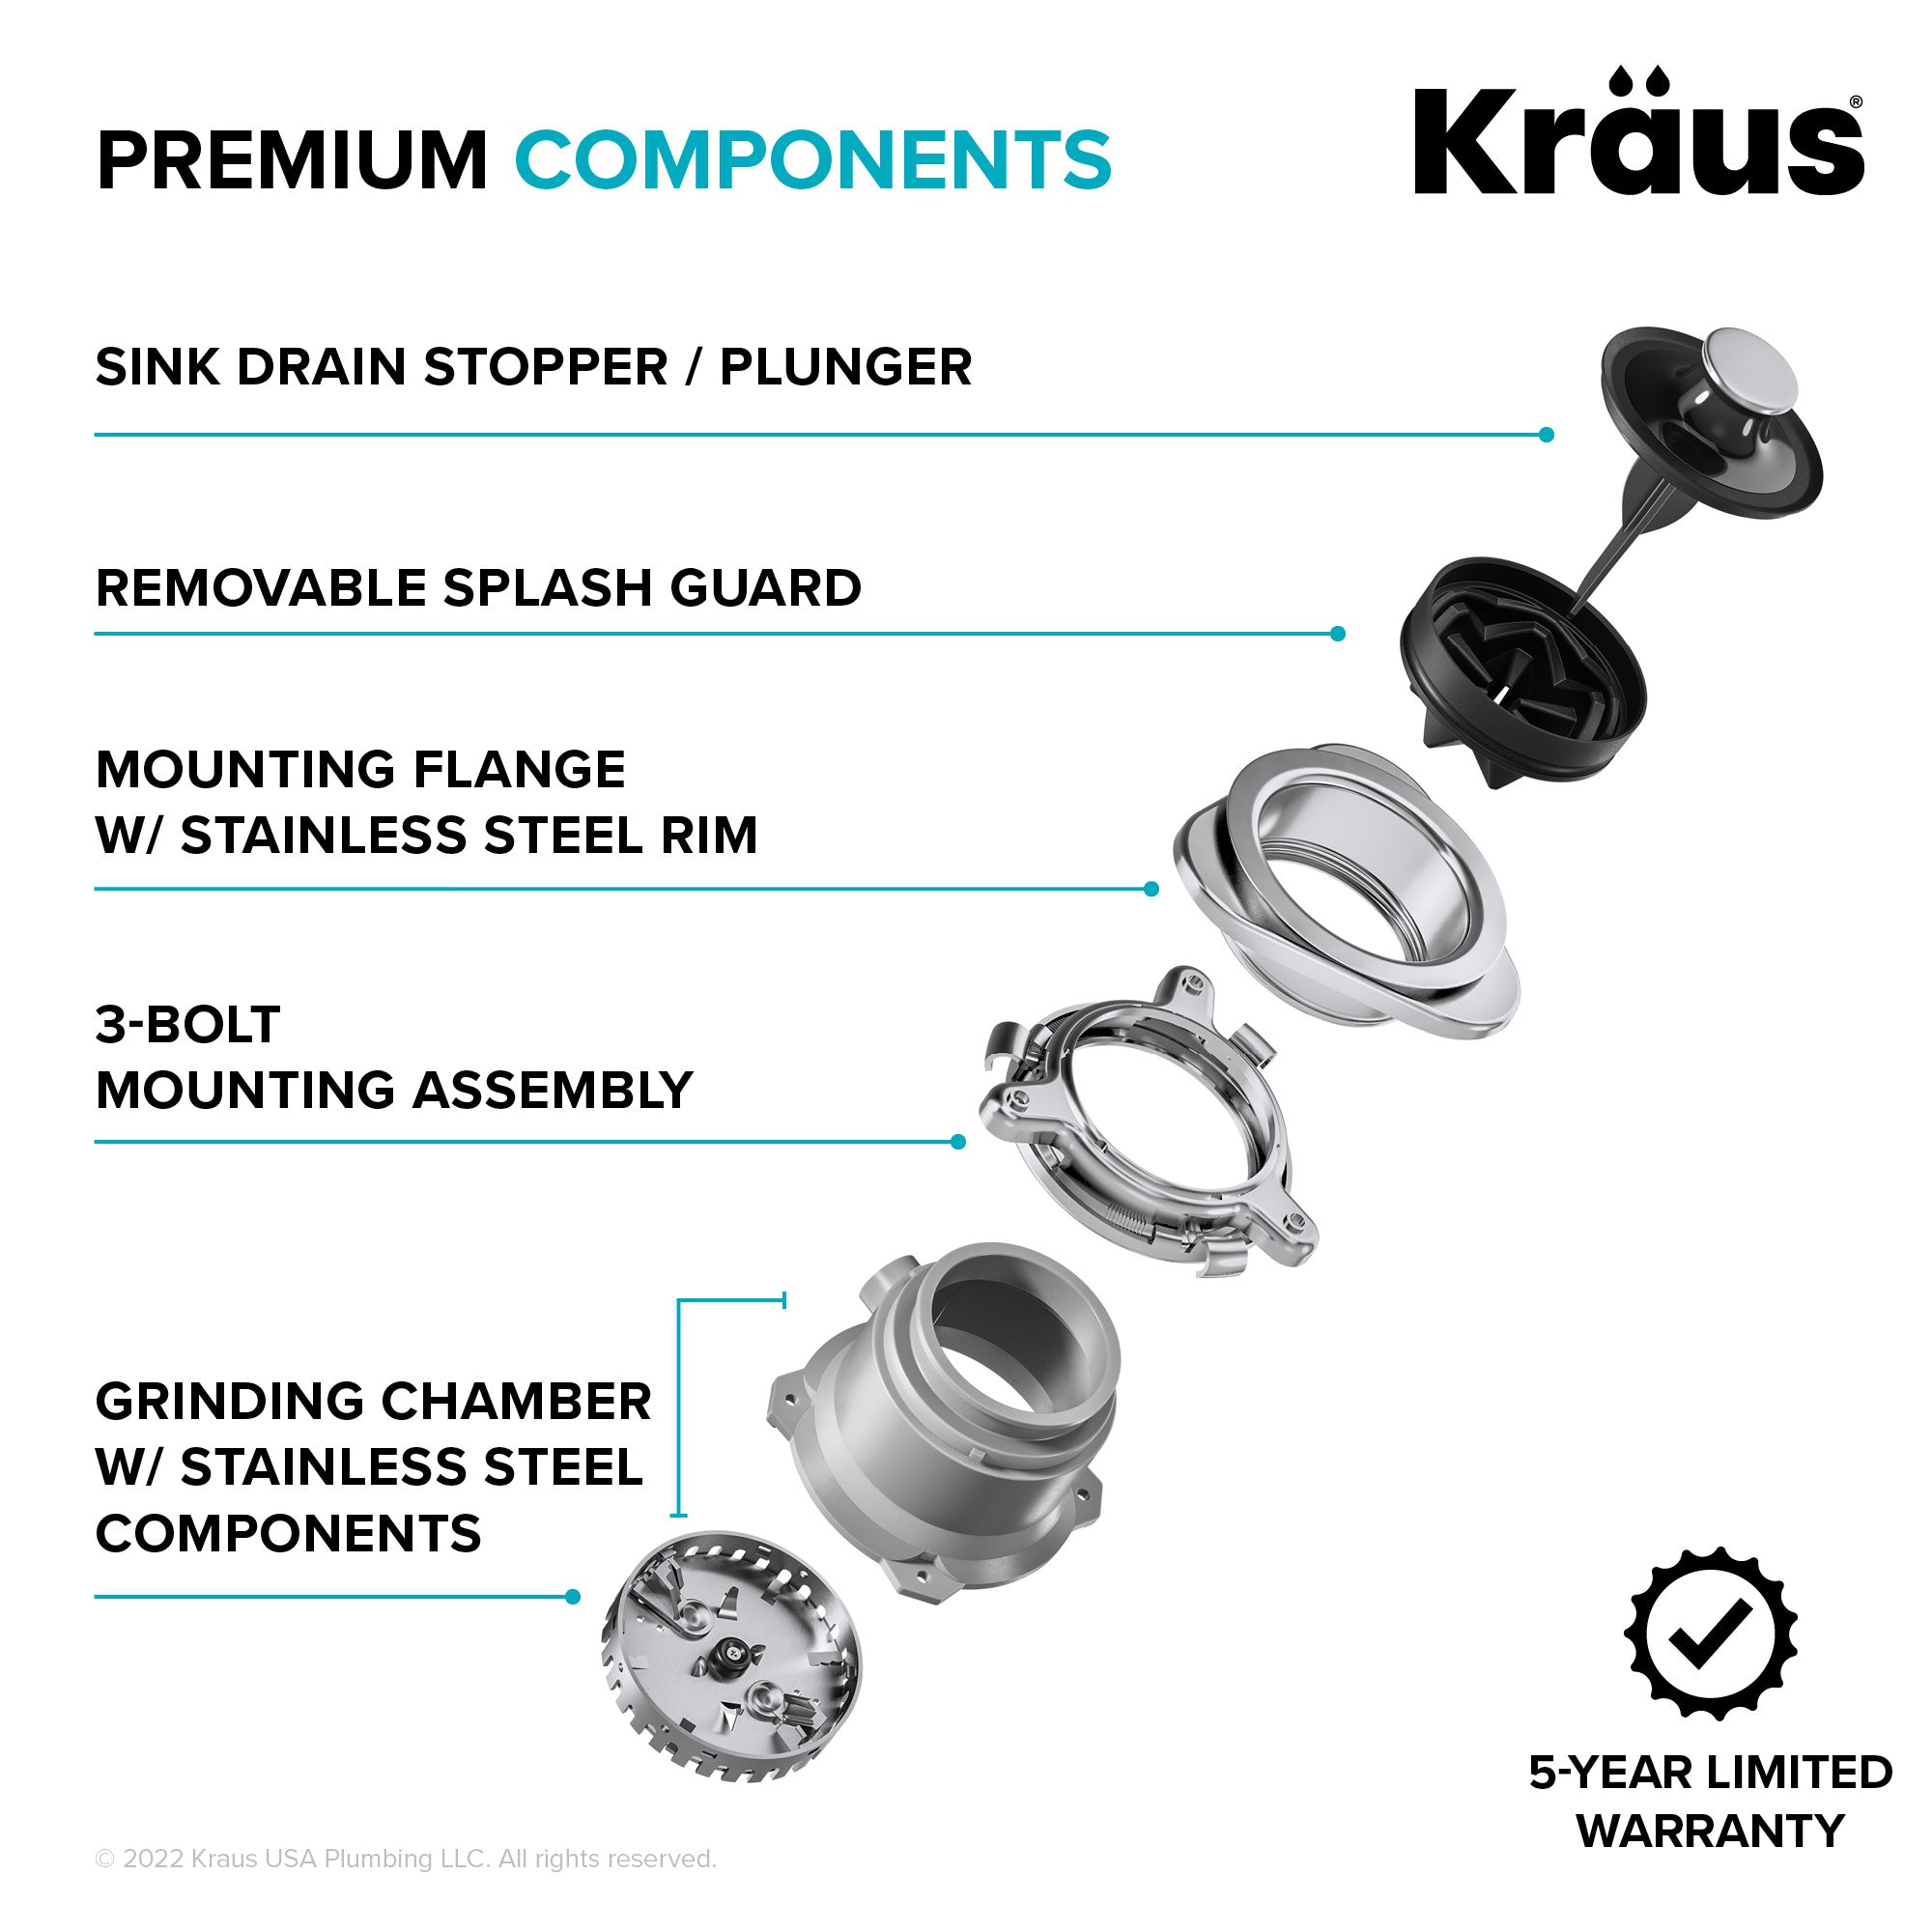 KRAUS WasteGuard High-Speed Ultra Quiet 1/2 HP Continuous Feed Garbage Disposal